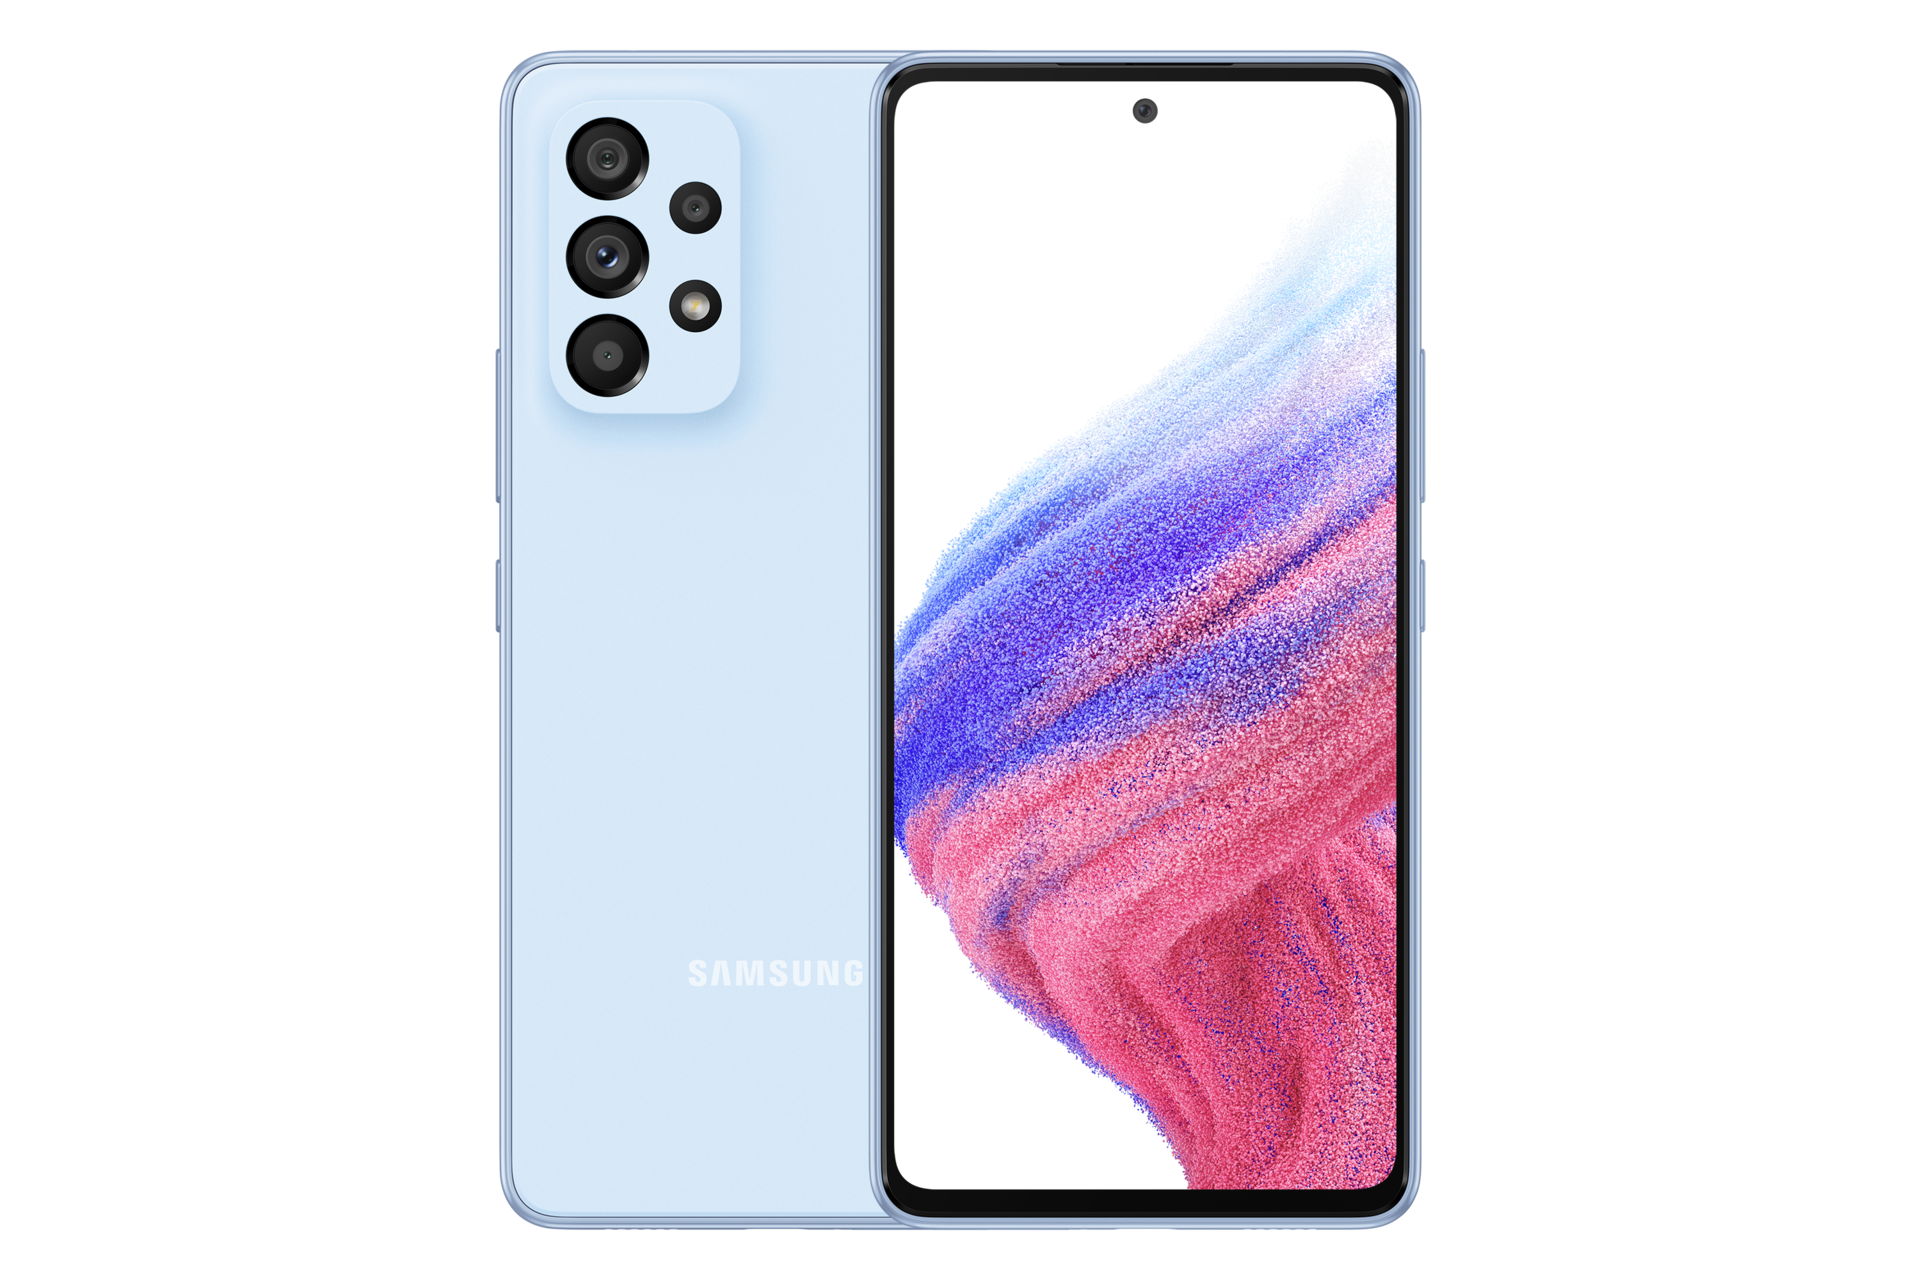 1. Galaxy A53 5G in Awesome Blue seen from the front with a colorful wallpaper onscreen. It spins slowly, showing the display, then the smooth rounded side of the phone with the SIM tray, then the matte finish and the minimal camera housing on the rear and comes to a stop at the front view again.